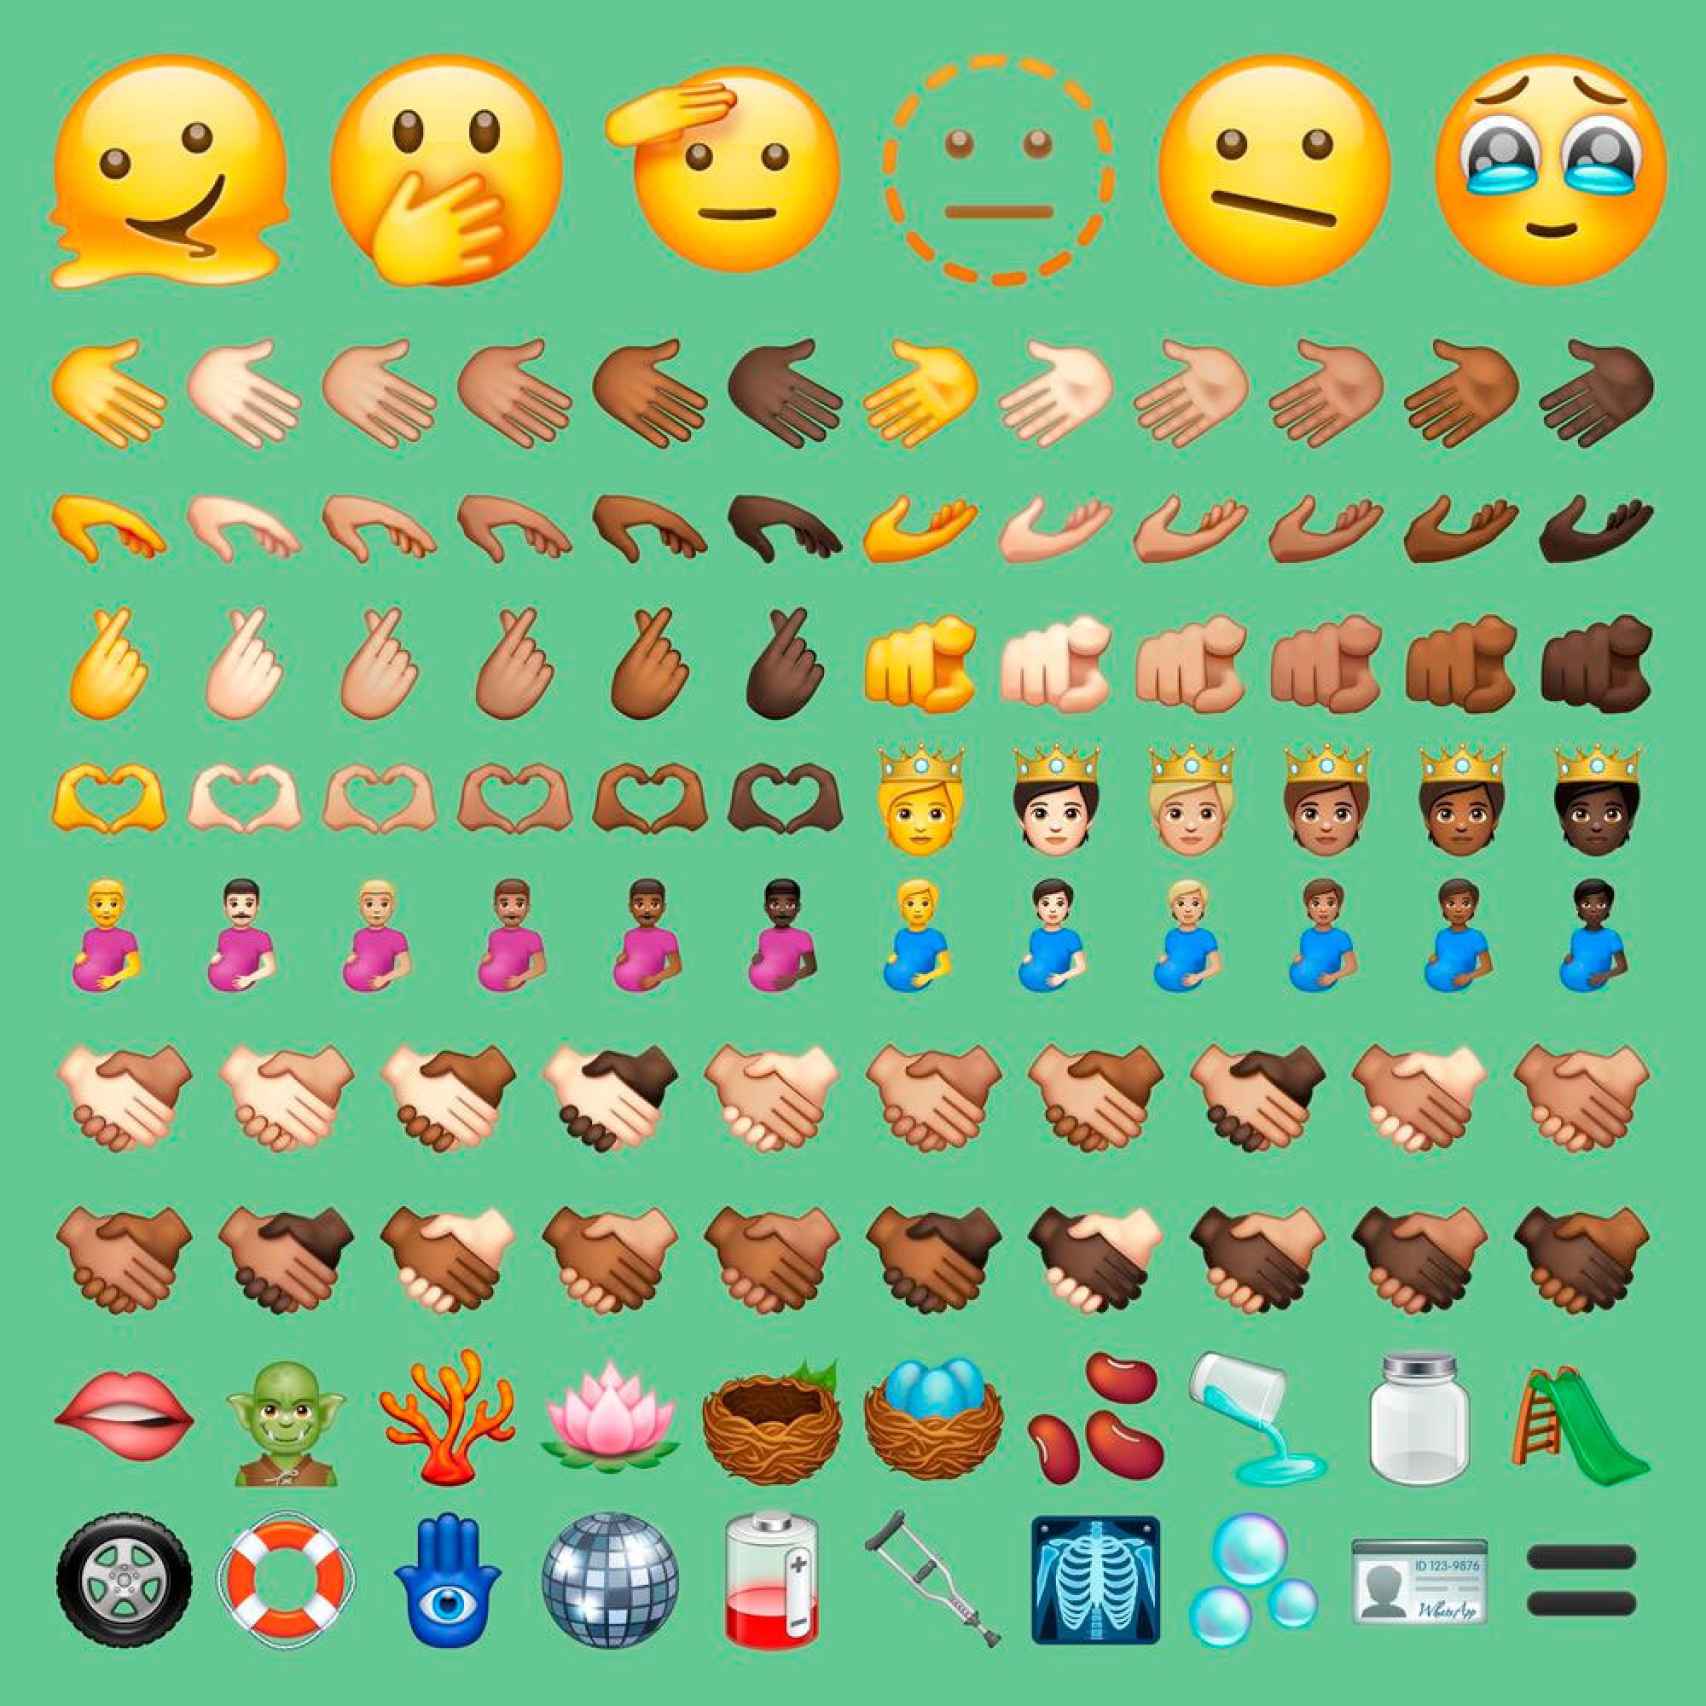 107 new emoticons arrive on WhatsApp for Android including a pregnant man